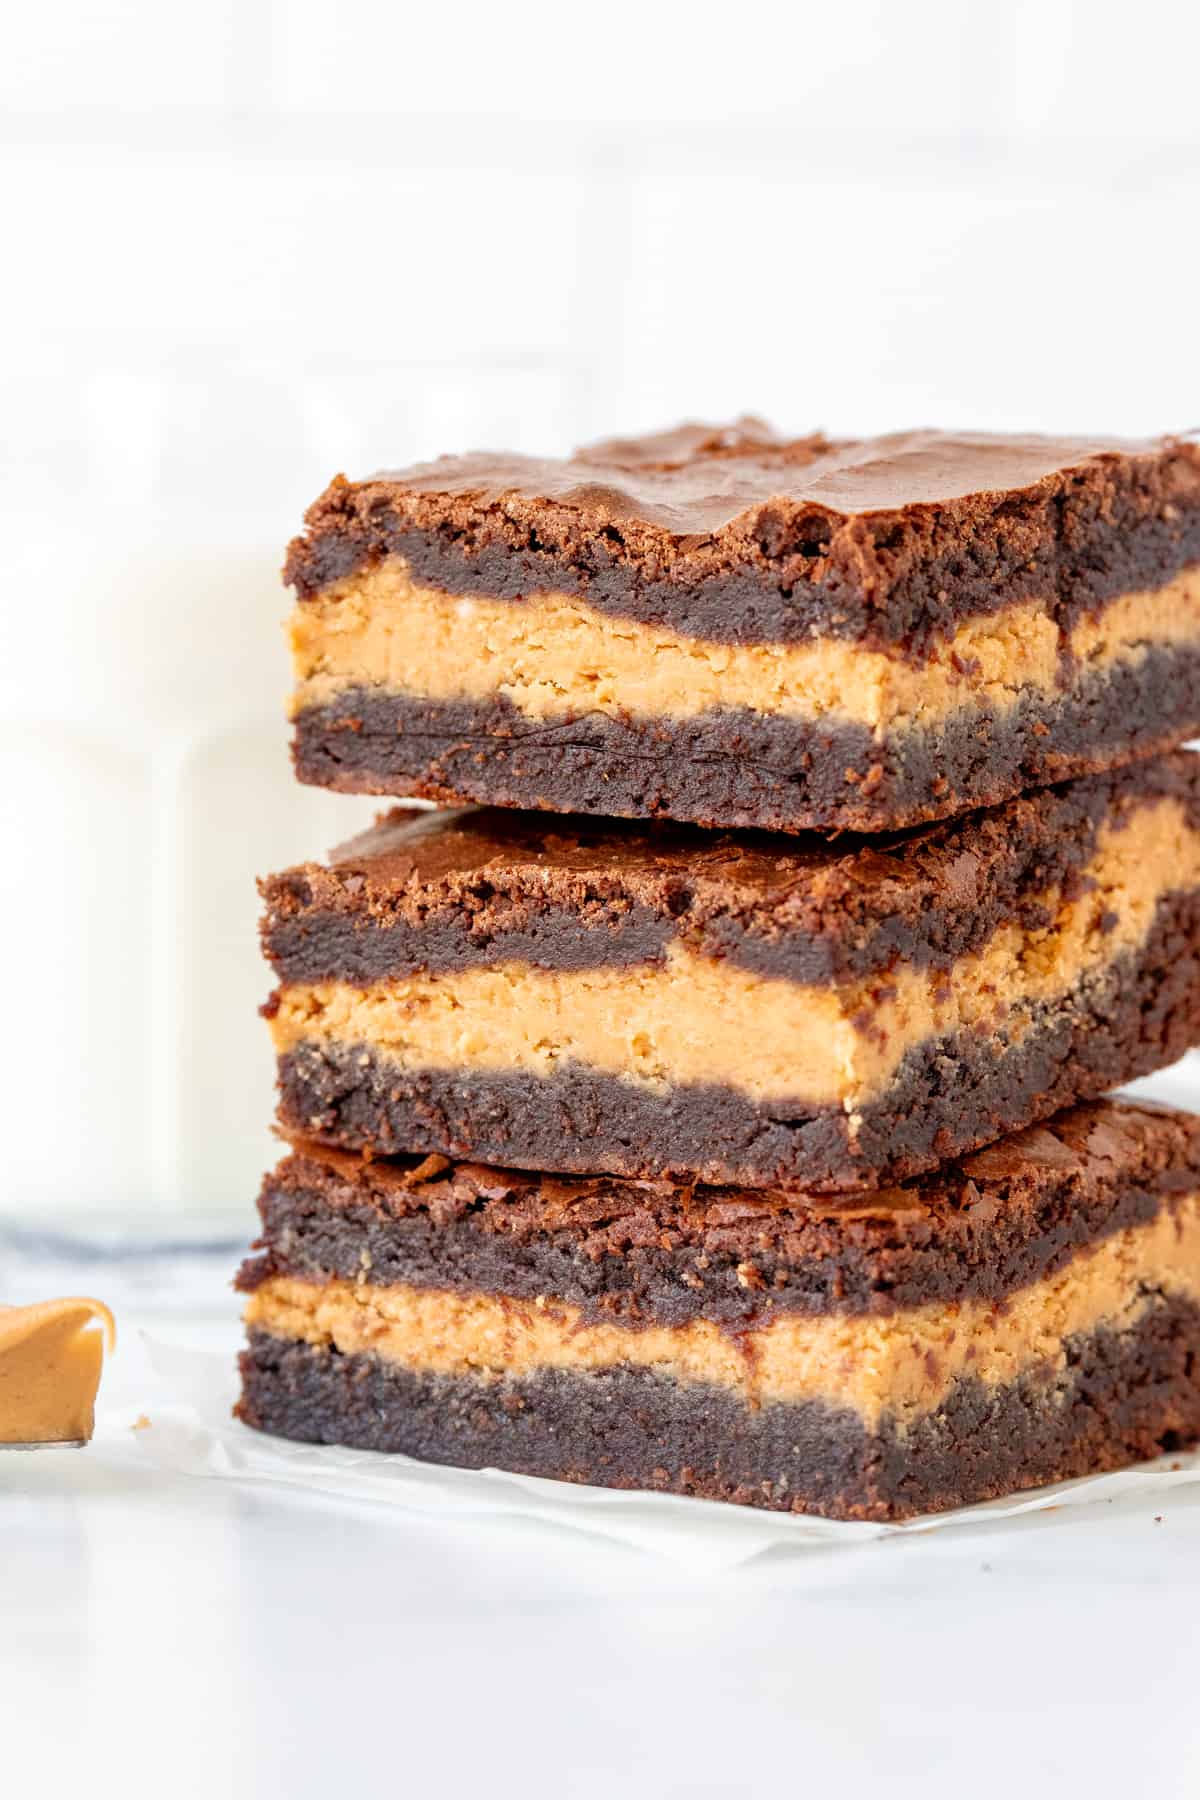 Three peanut butter stuffed brownies, one on top of each other